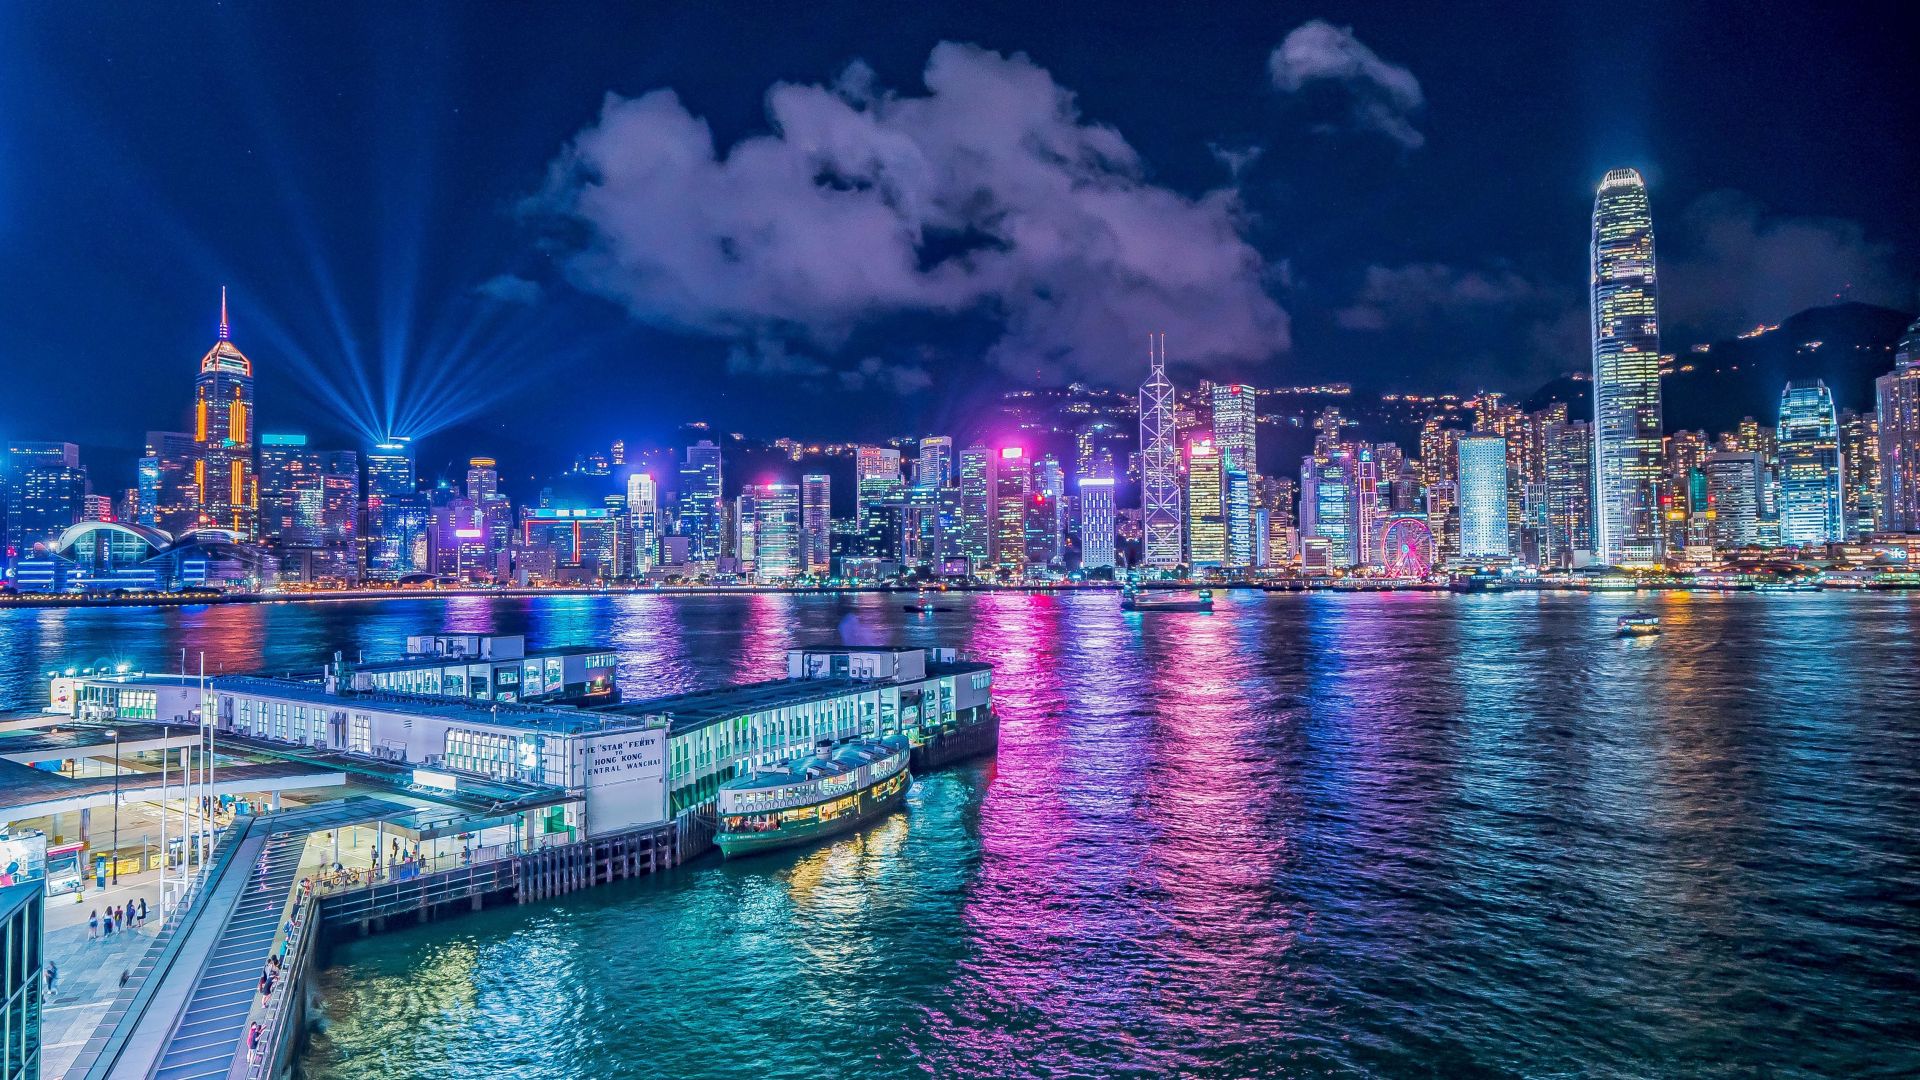 City At Night Wallpaper for PC. | New york wallpaper, City wallpaper, New  york night